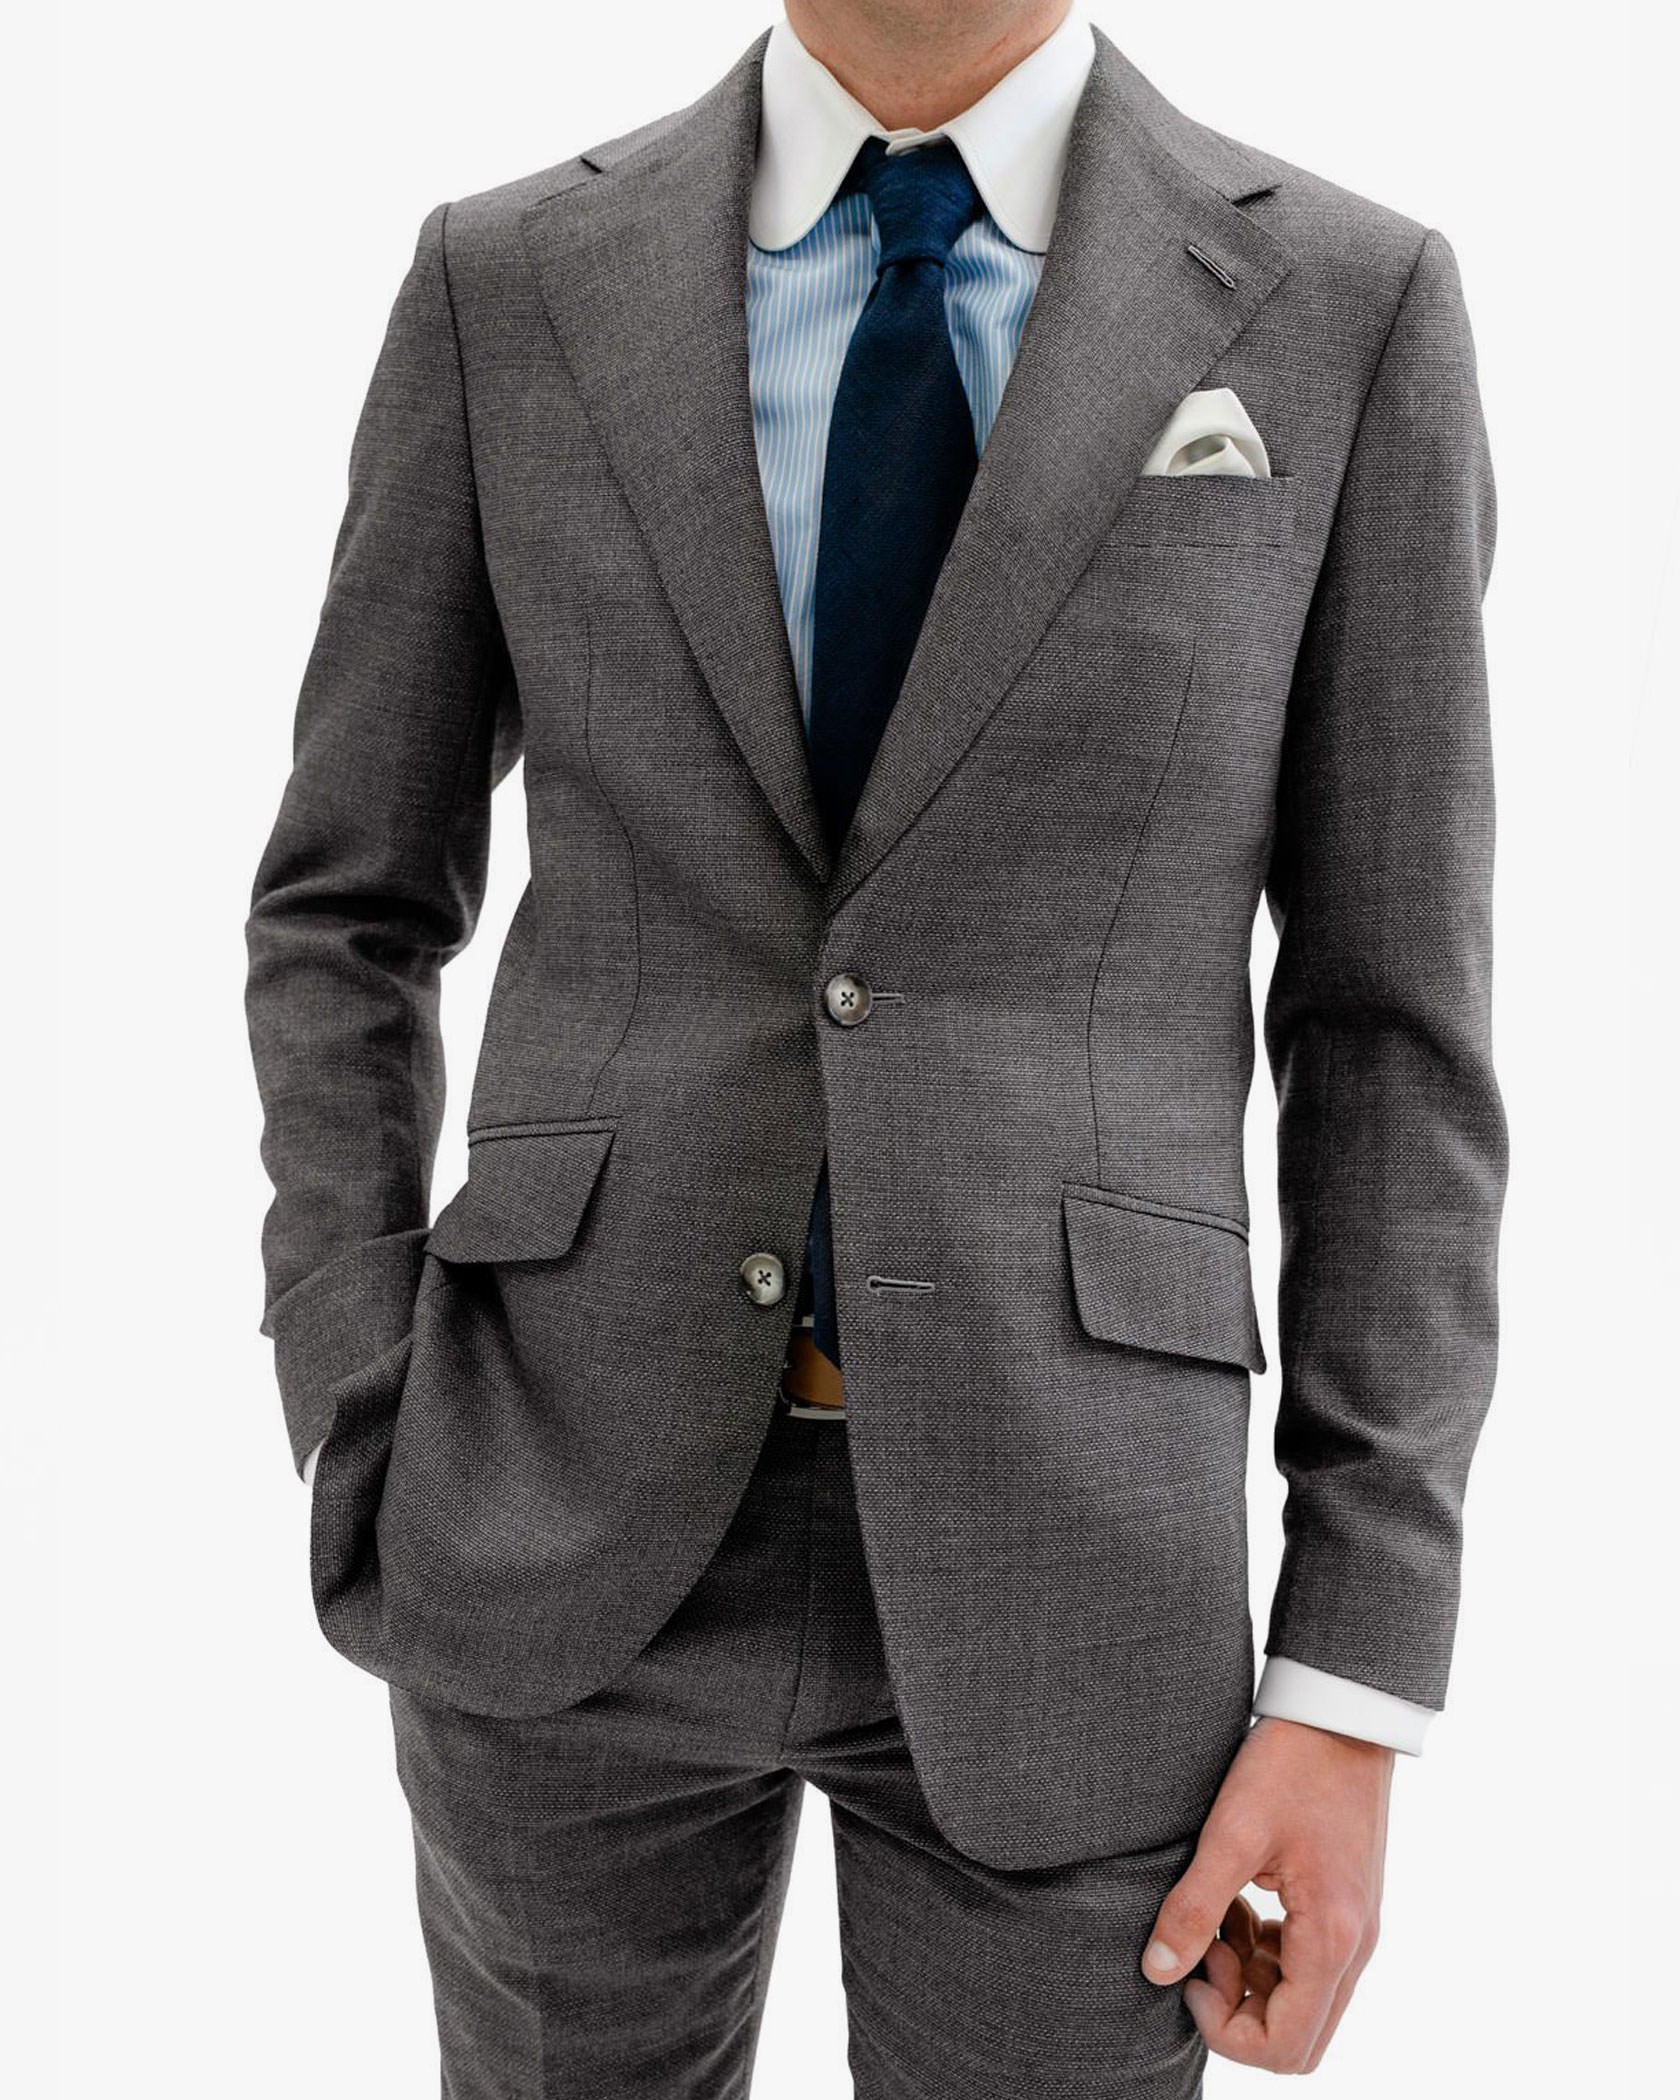 The Standard Grey Suit